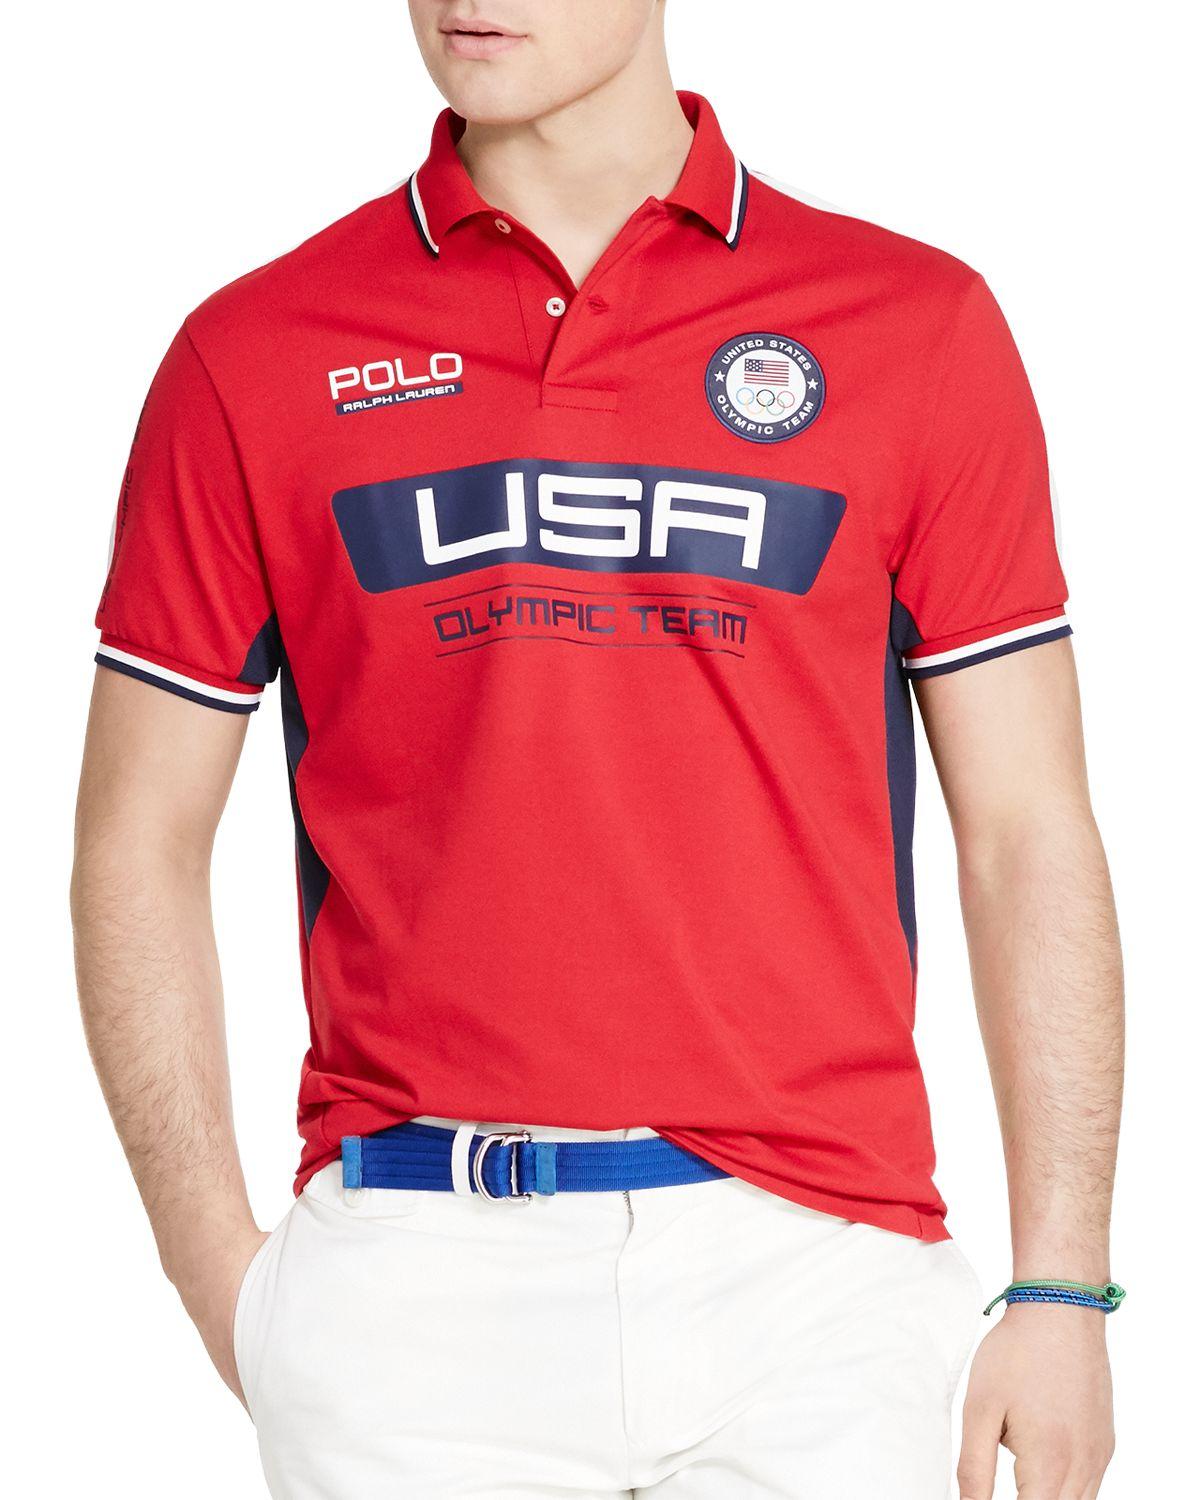 Polo Ralph Lauren Team USA CustomFit Polo Shirt in Red for Men Lyst